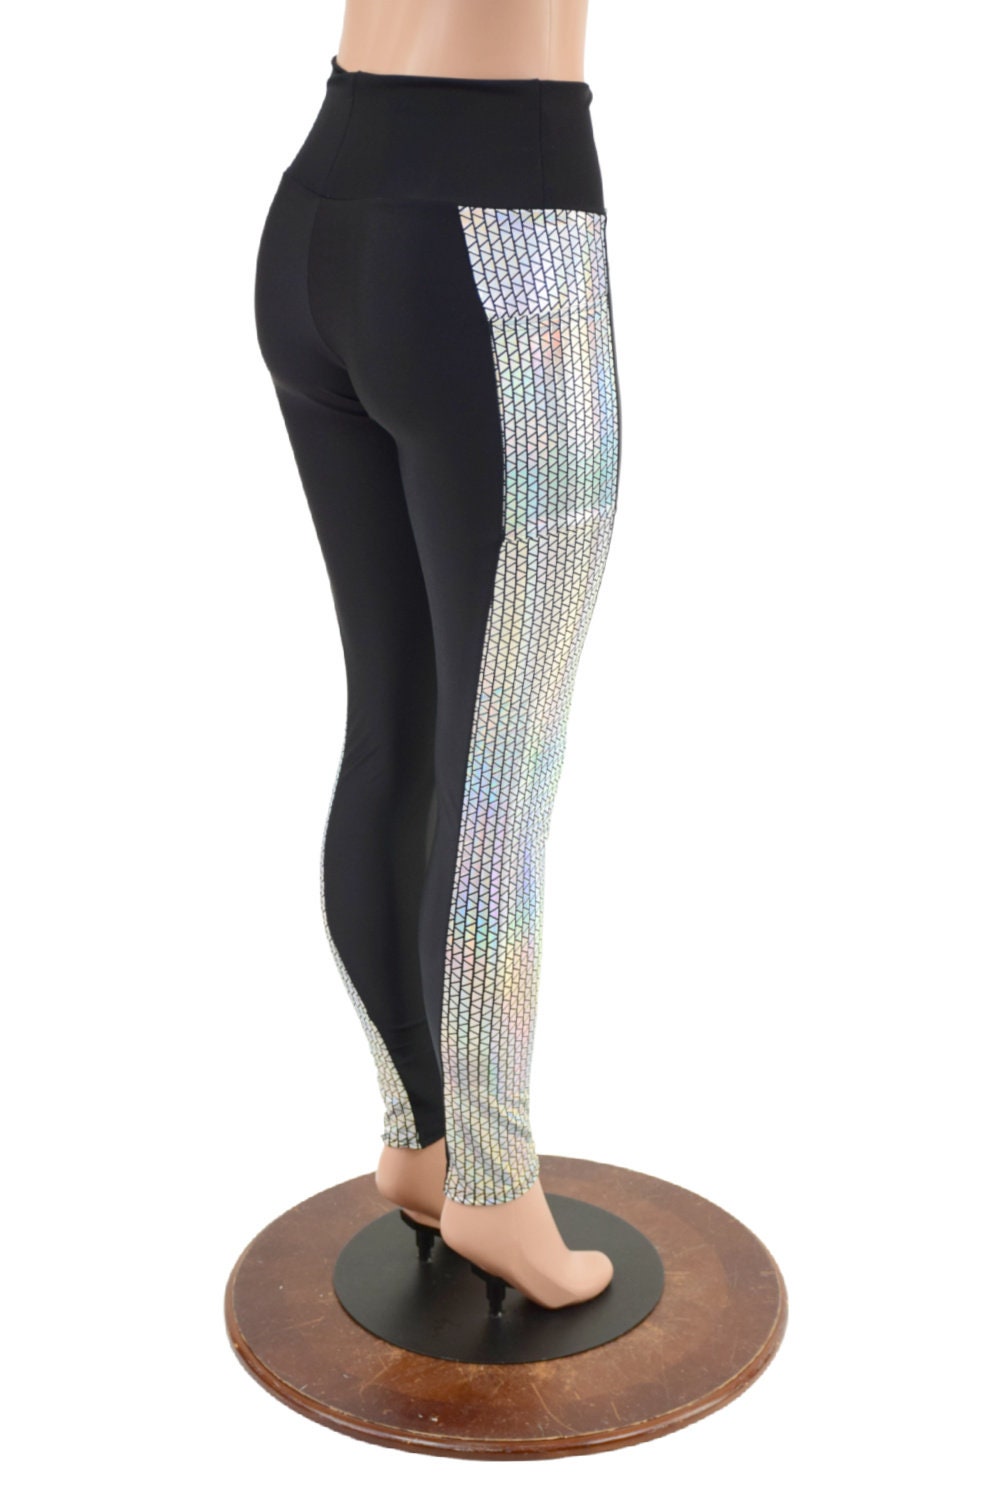 High Waist Smooth Black Spandex Leggings With Prism Holographic Side Panels  and Pockets 157441 